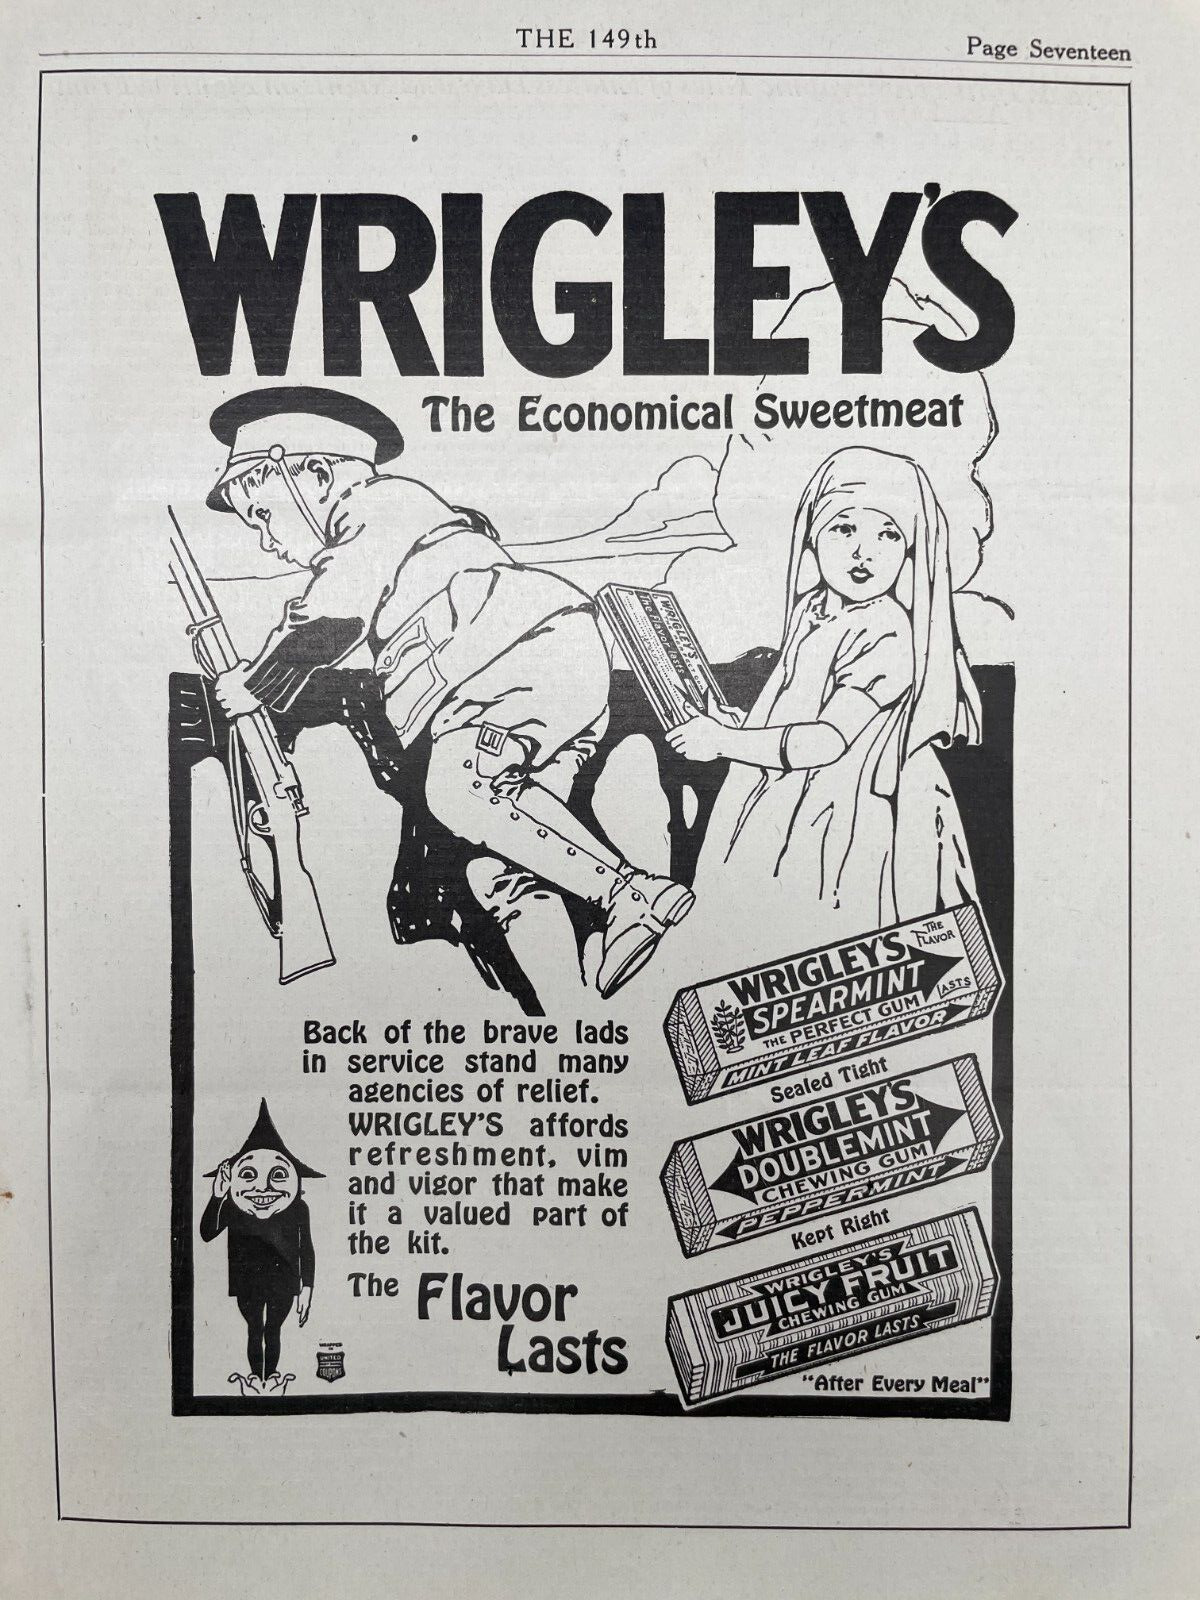 1918 WRIGLEY'S Double Mint Chewing Gum Sweetmeat WWI Child Soldier Print Ad